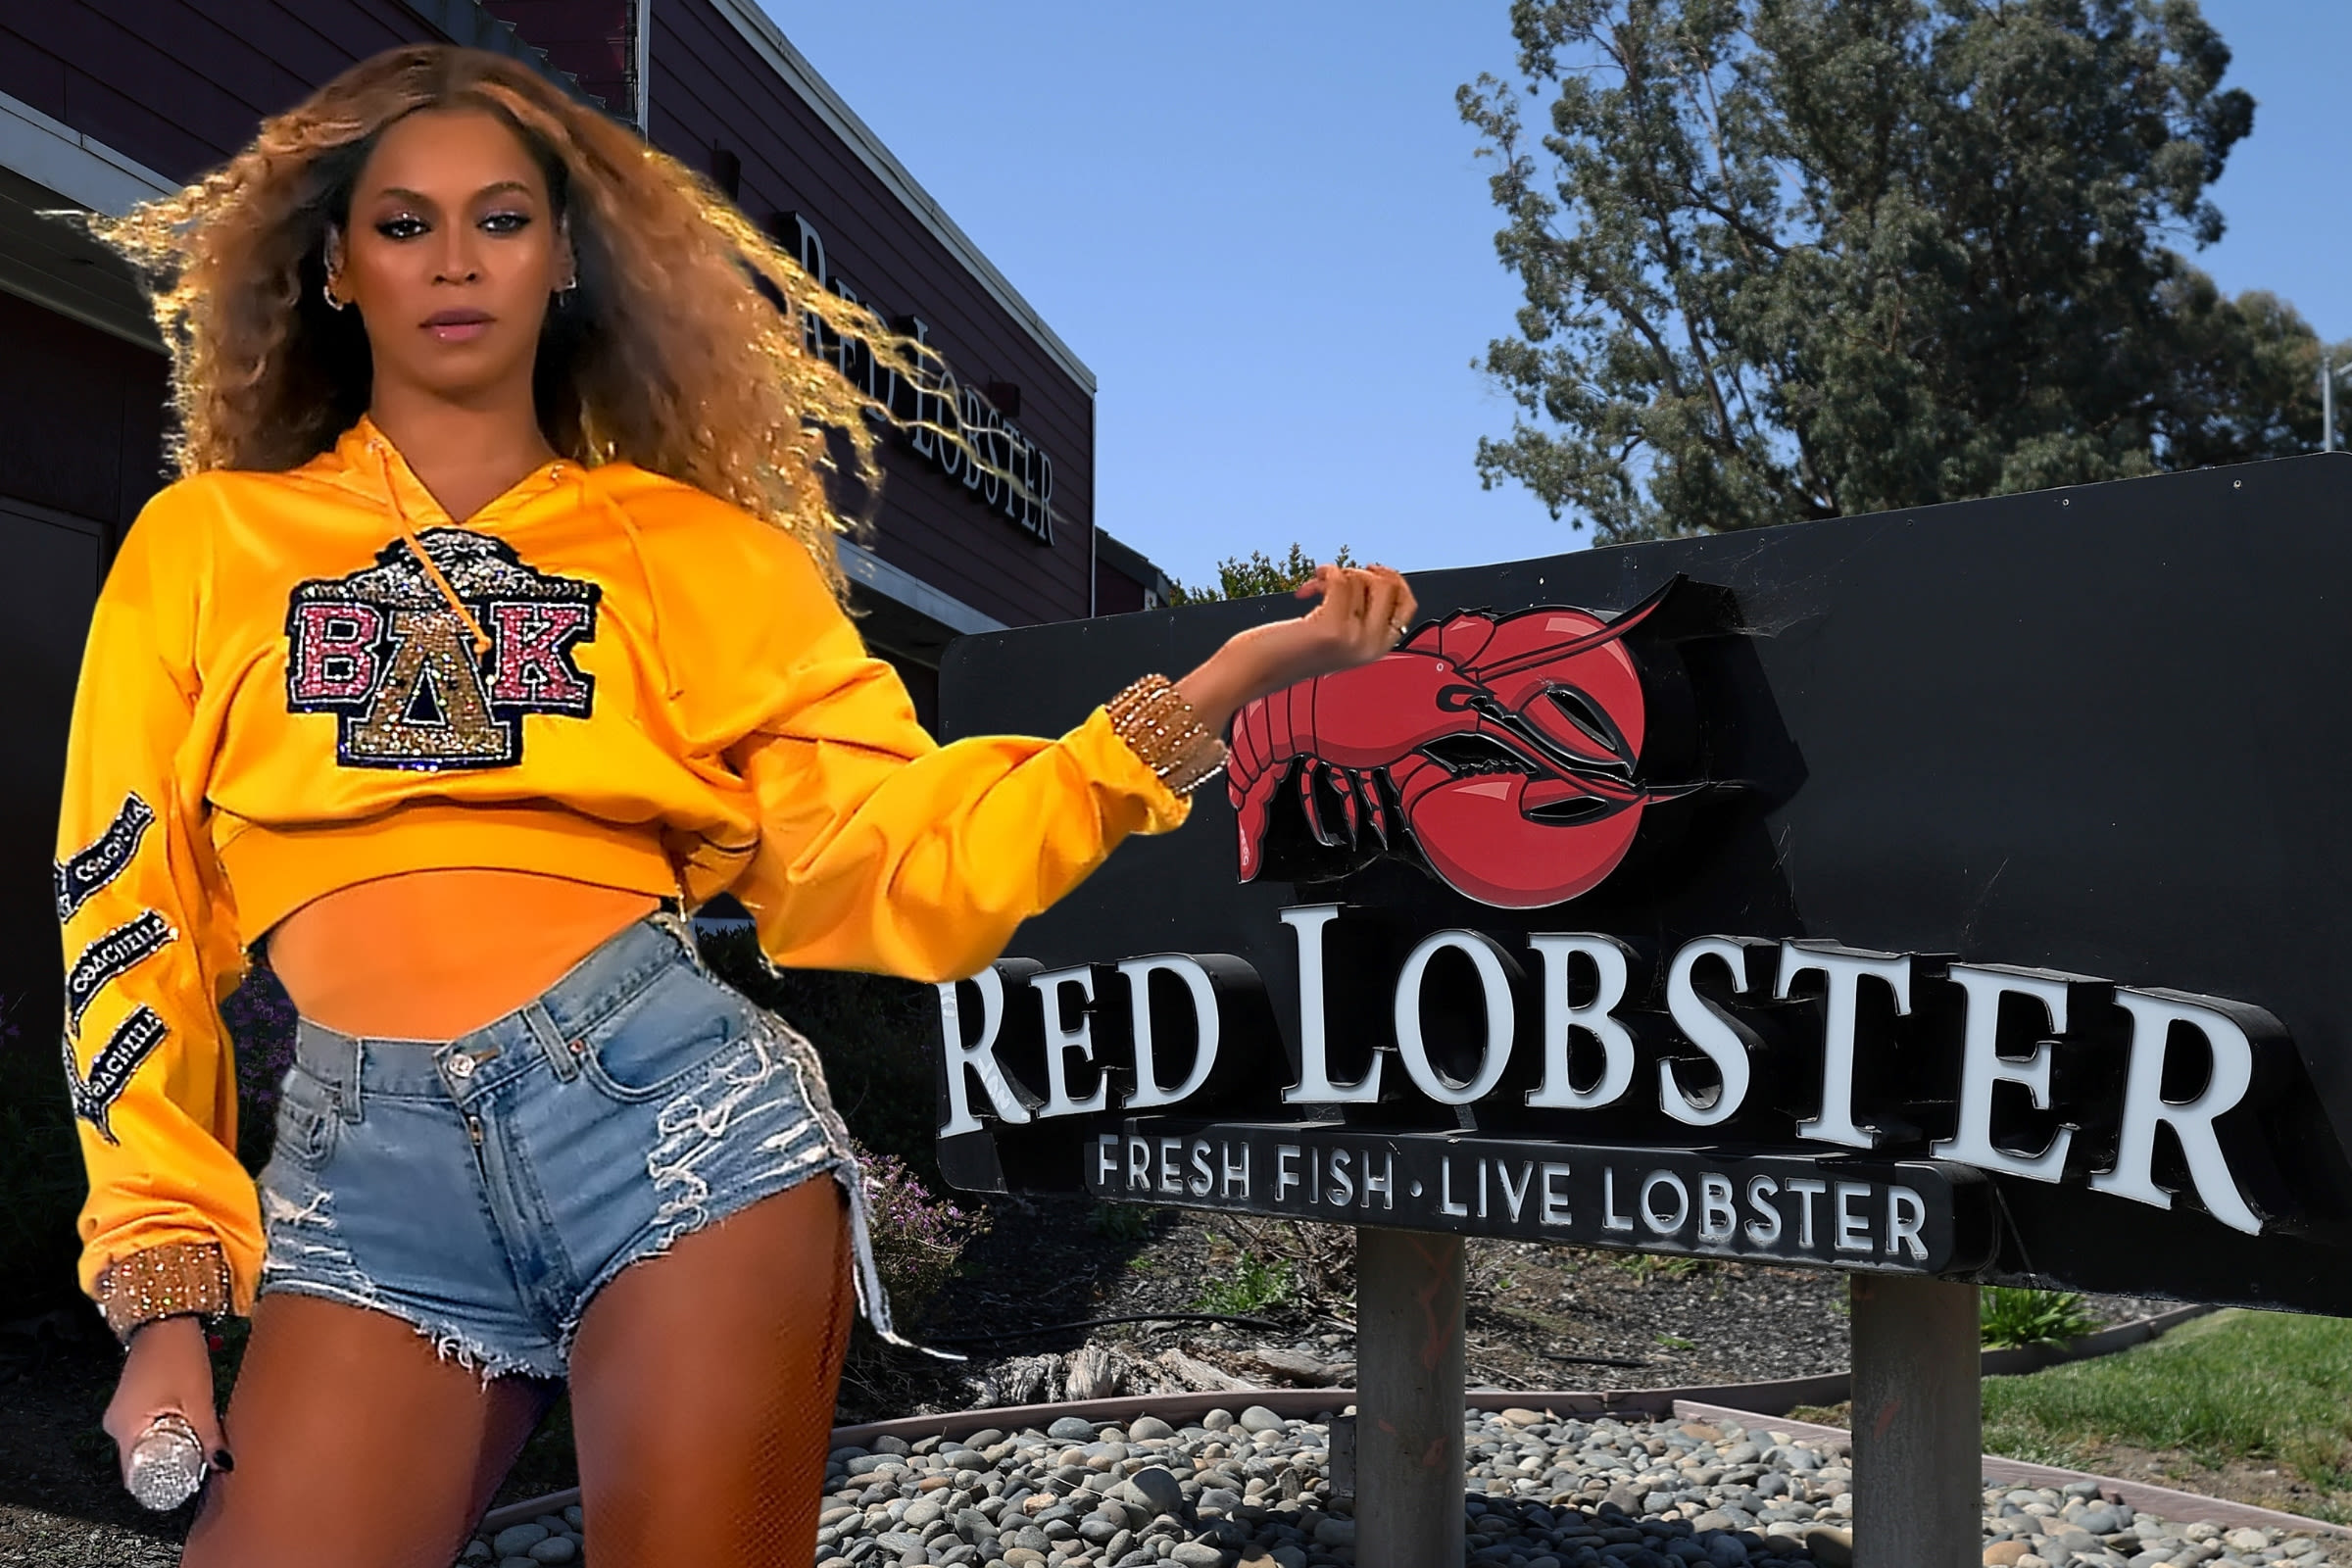 Beyoncé gets dragged into Red Lobster collapse